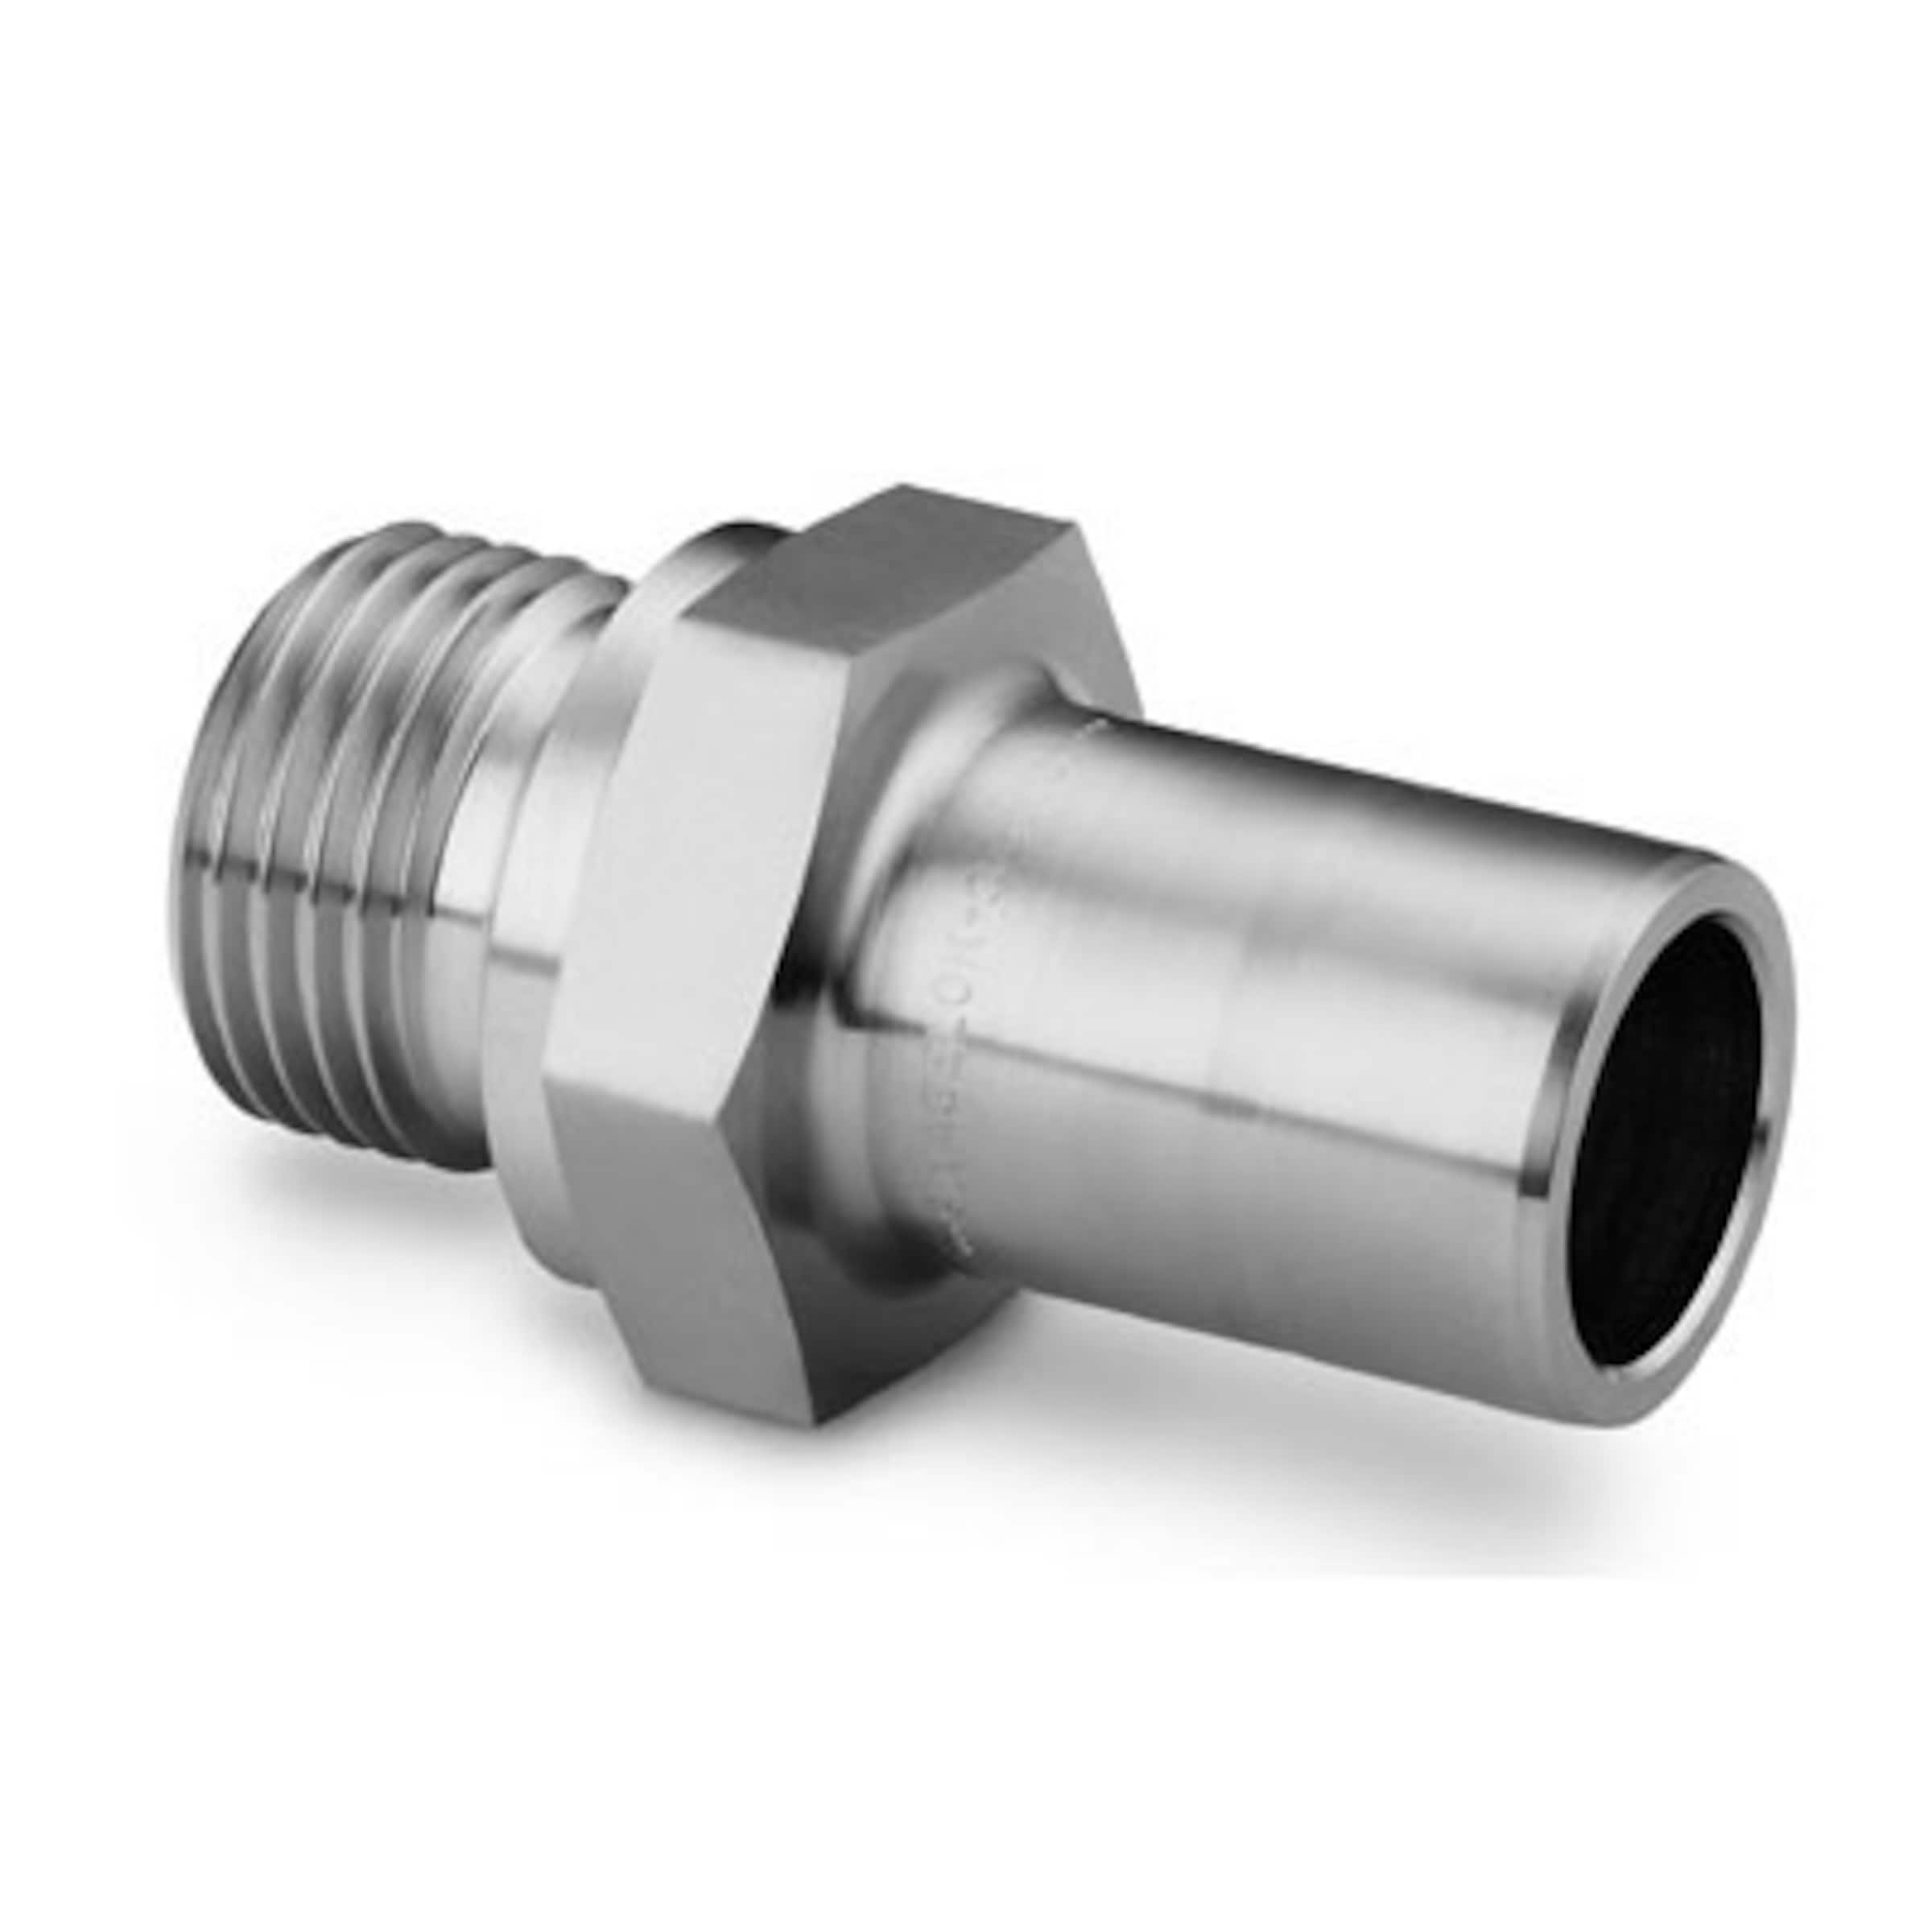 Stainless Steel Swagelok Tube Fitting, Bored-Through Male, 51% OFF